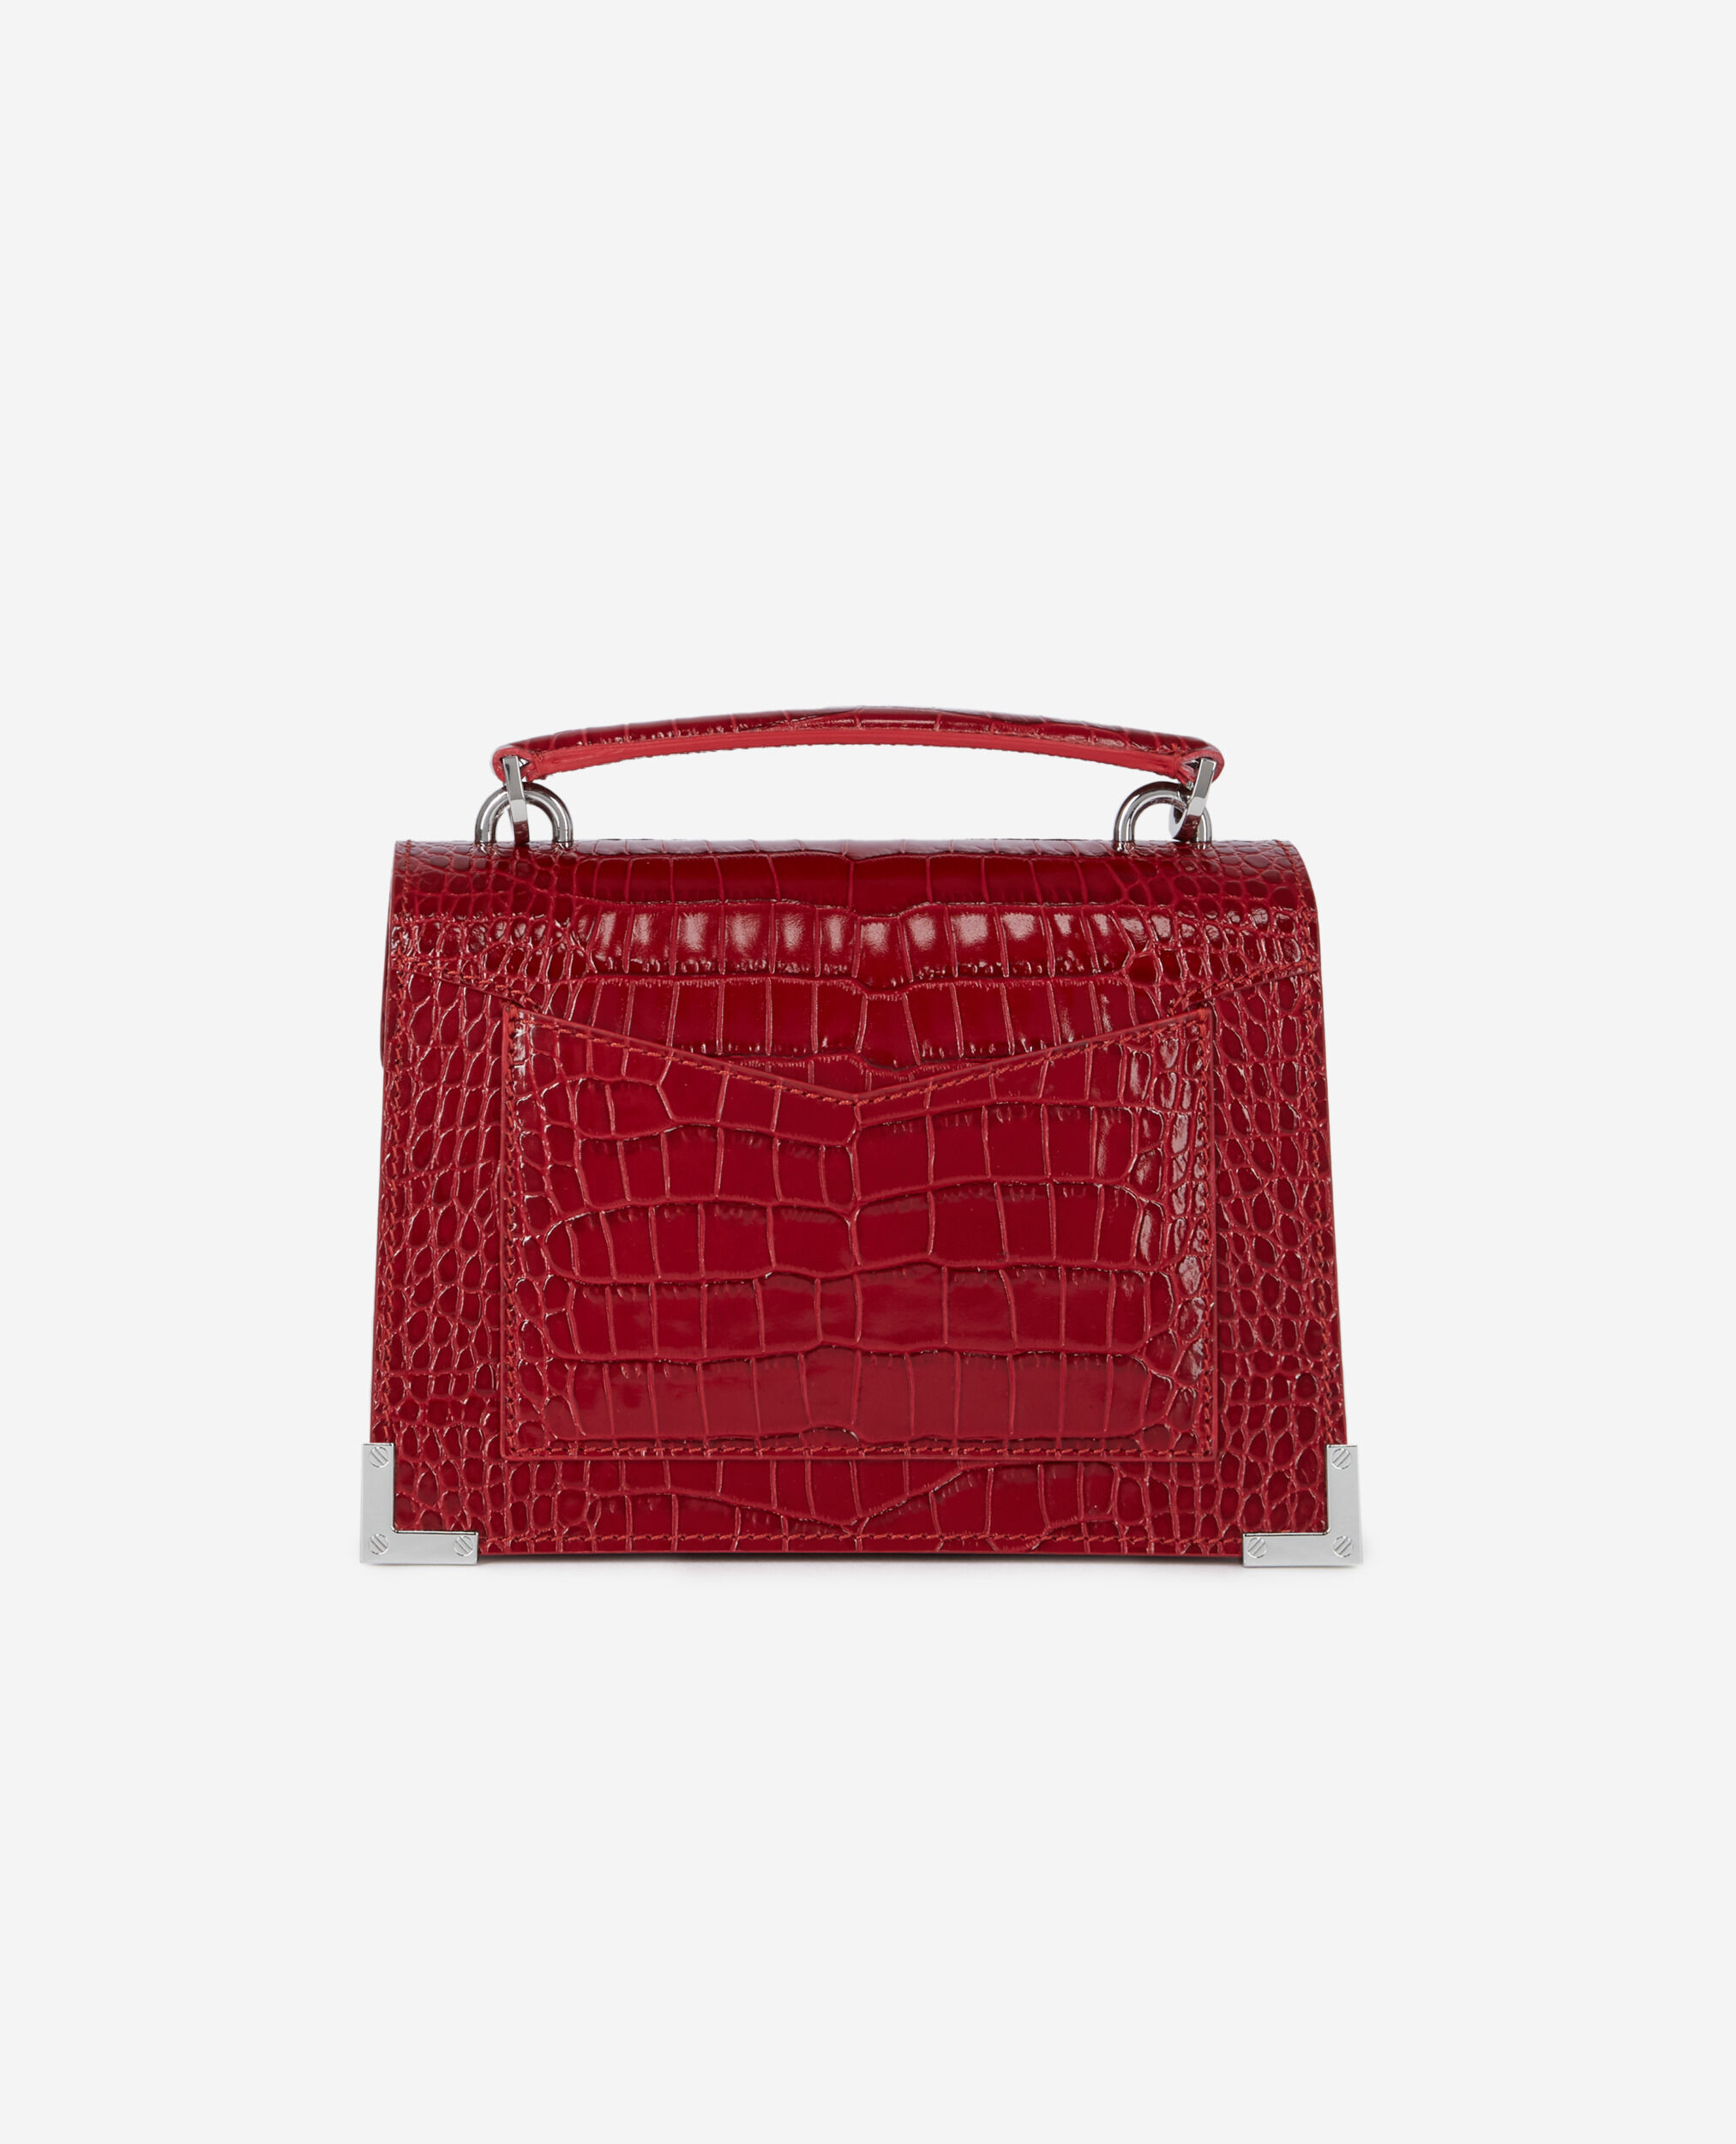 Small red Emily bag, RED RISK, hi-res image number null